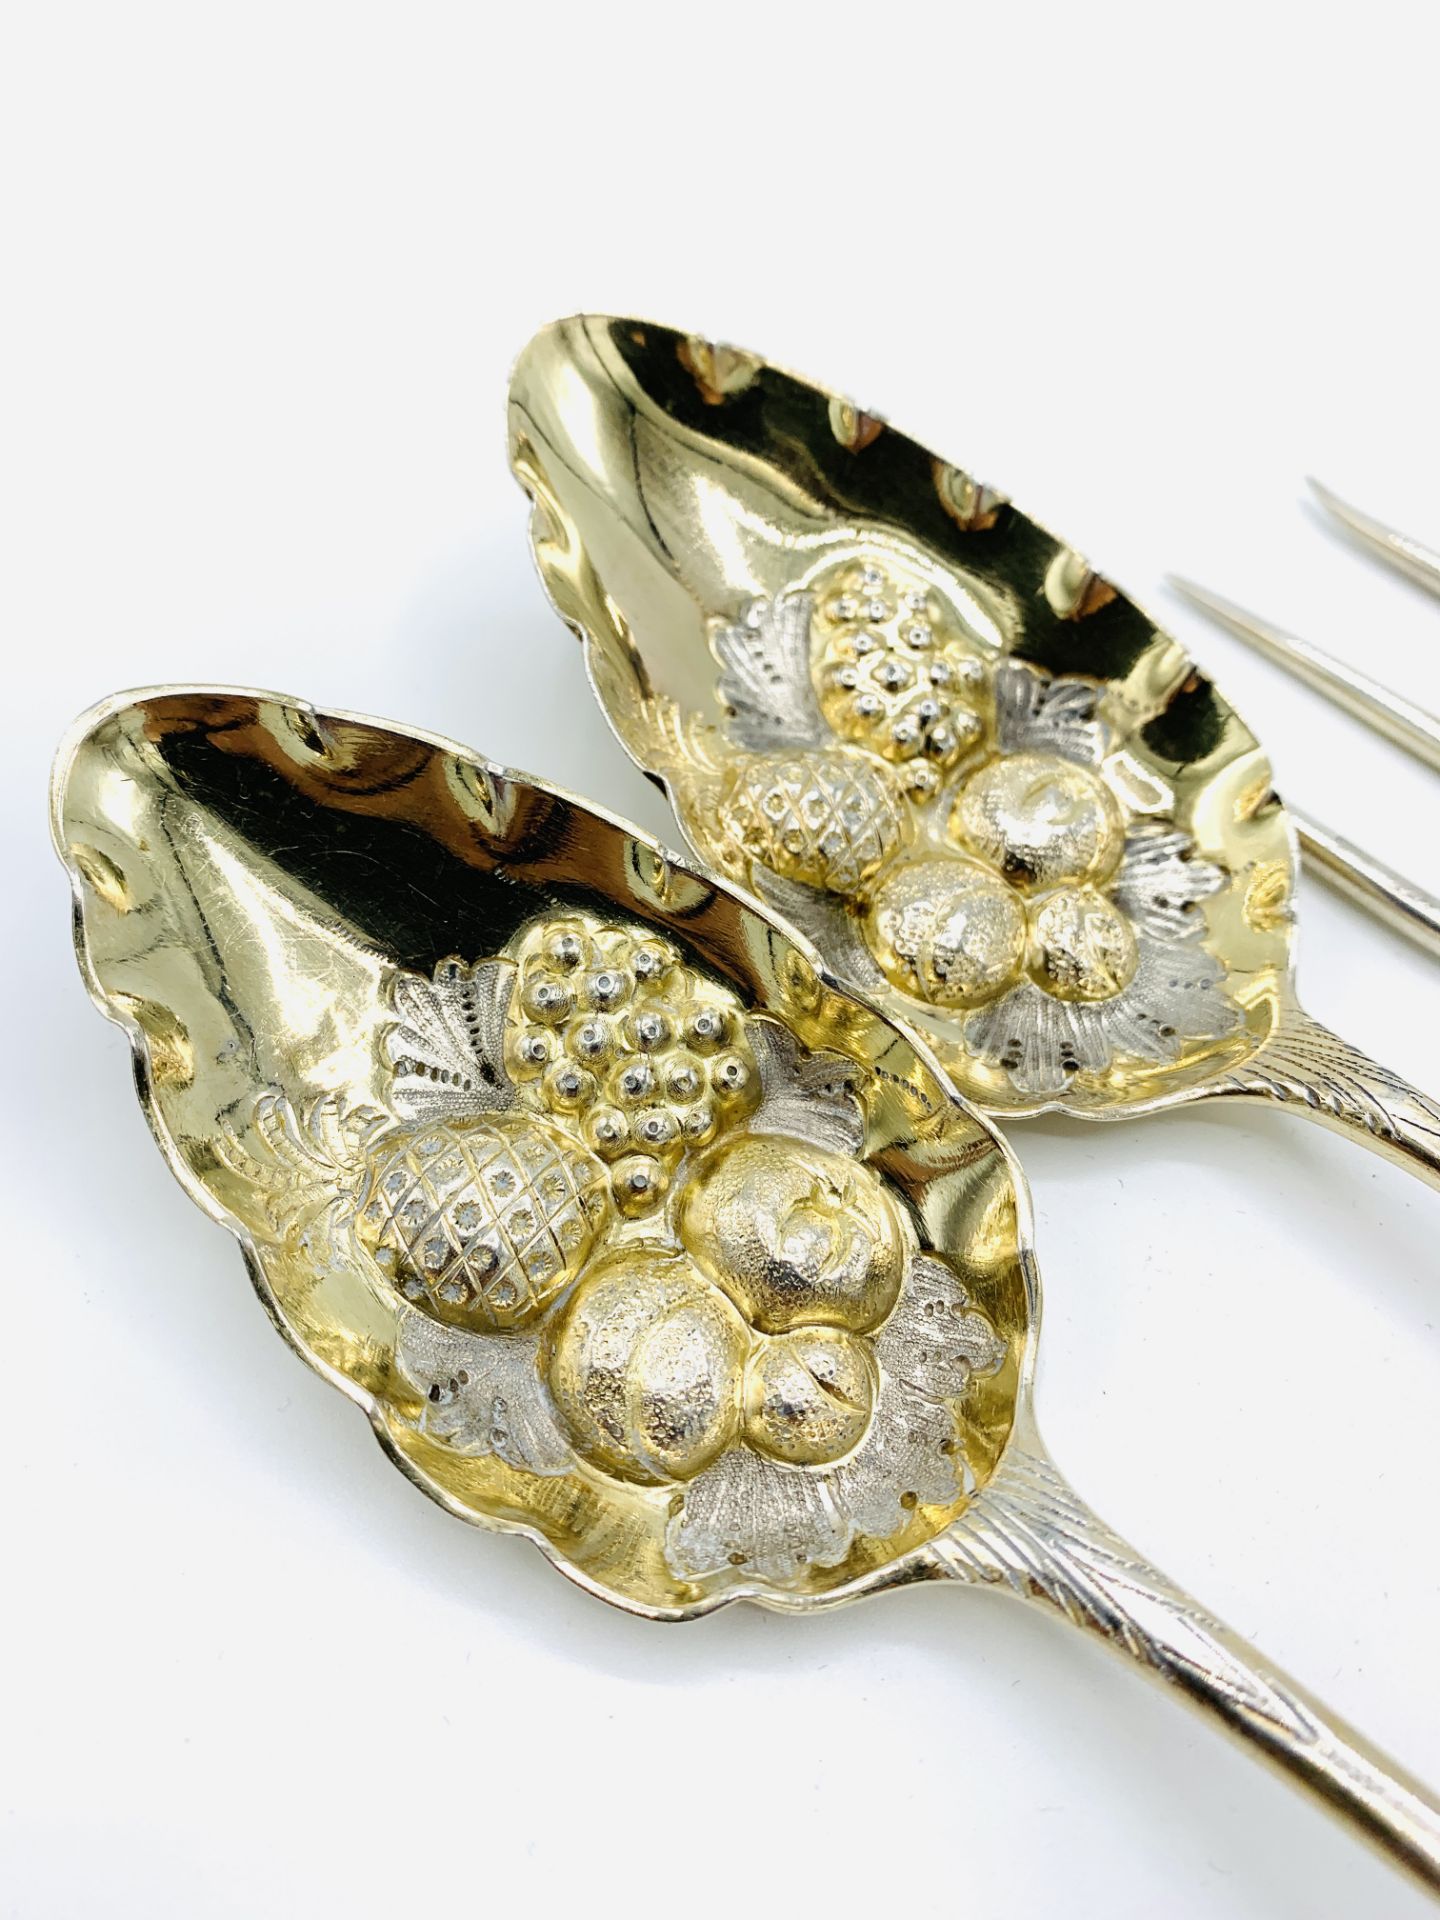 Two George III silver and gilt berry spoons and a silver 3 prong fork - Image 2 of 4